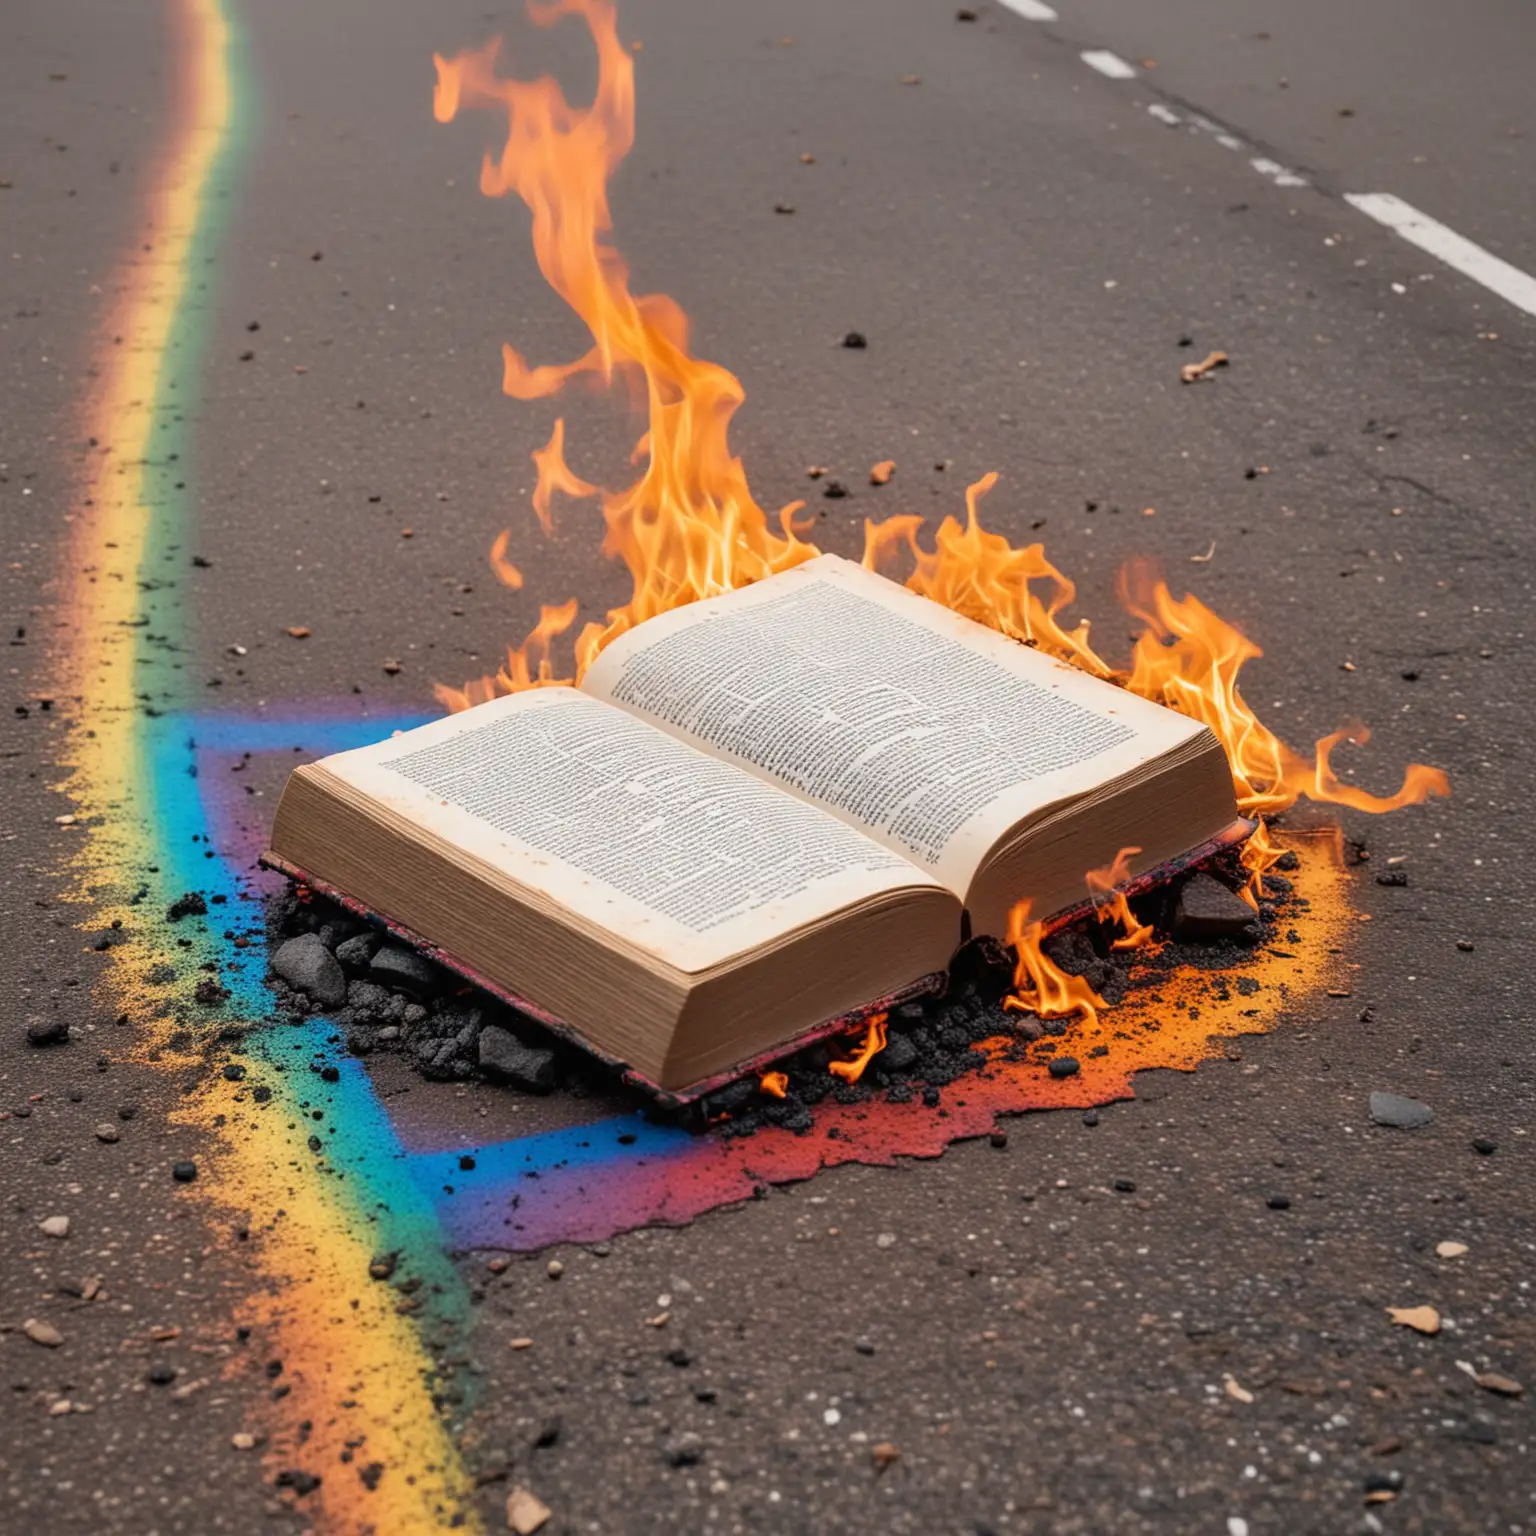 Flaming Book on a Vivid Rainbow Pathway